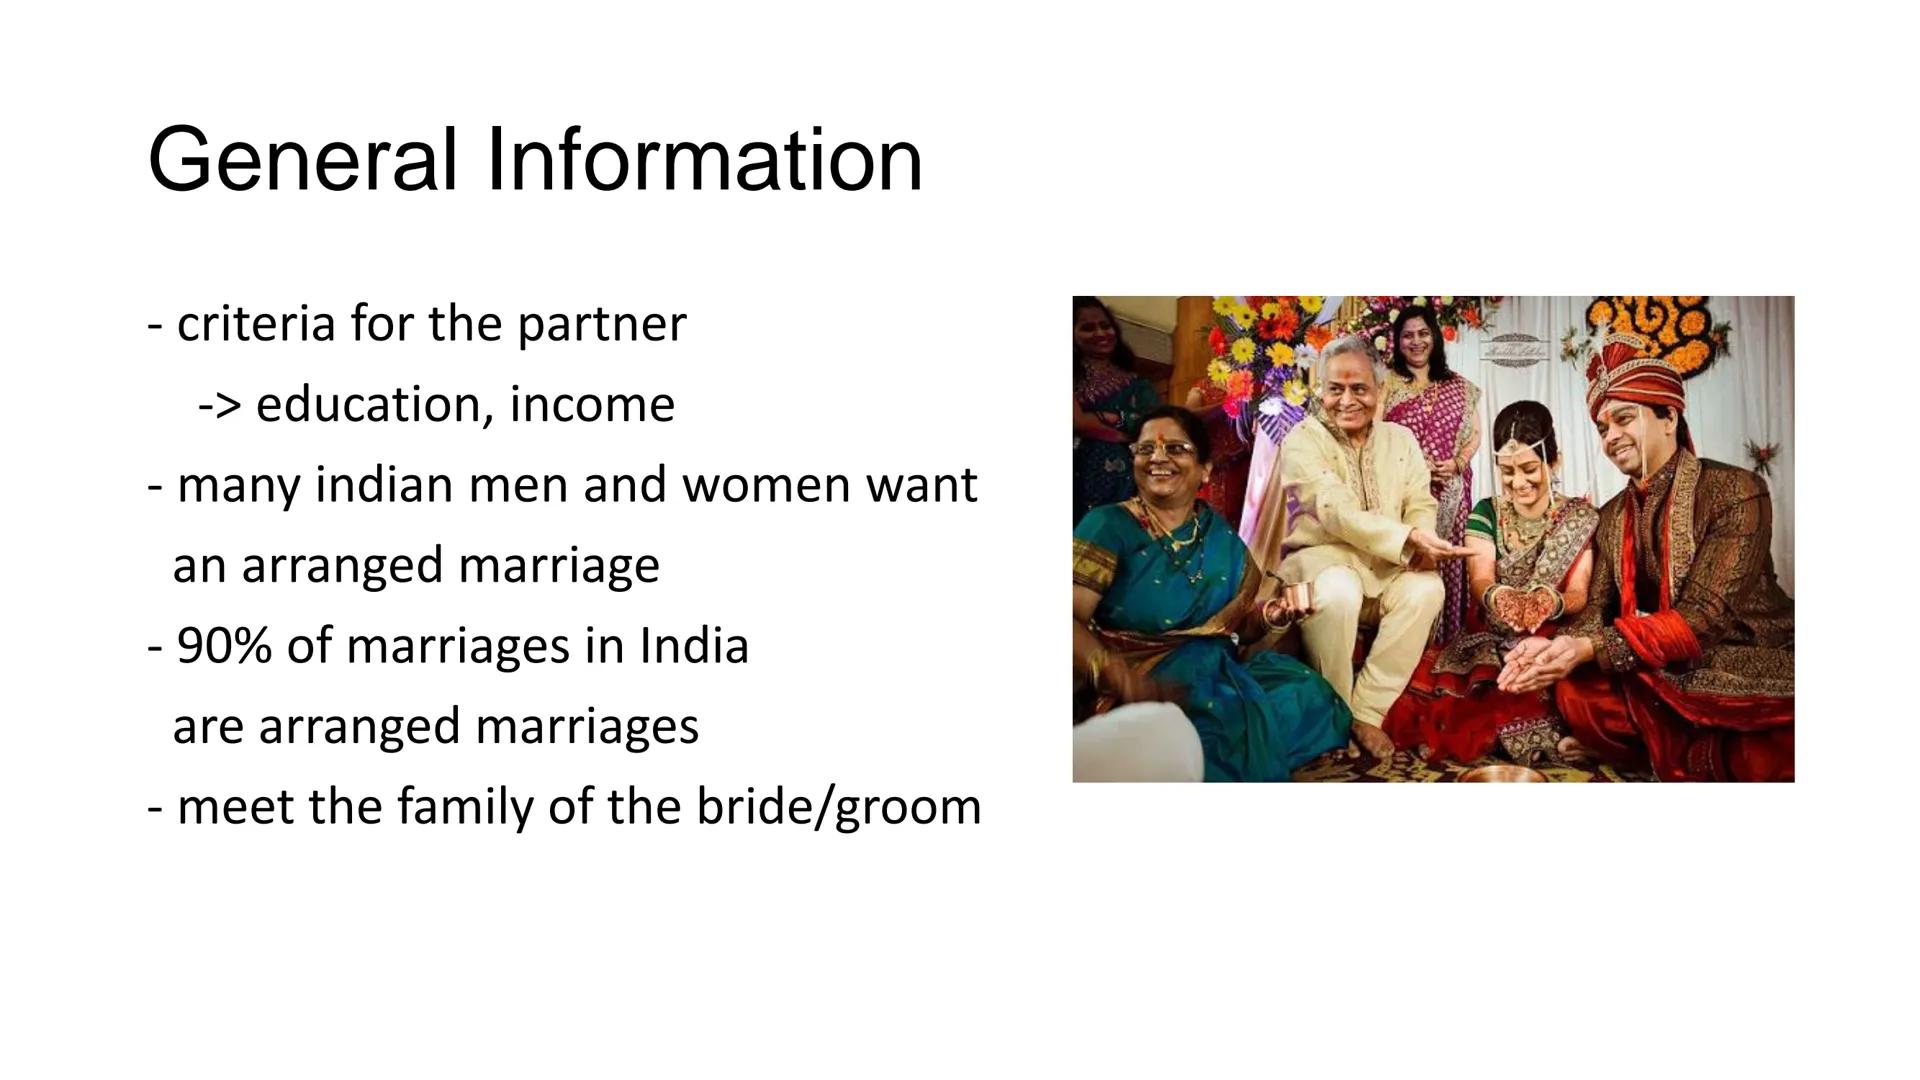 Arranged
marriages
In India Contents
1. General information
2. Pros and cons
3. The celebration
4. Our opinion
5. Source
6. Image Source Gen